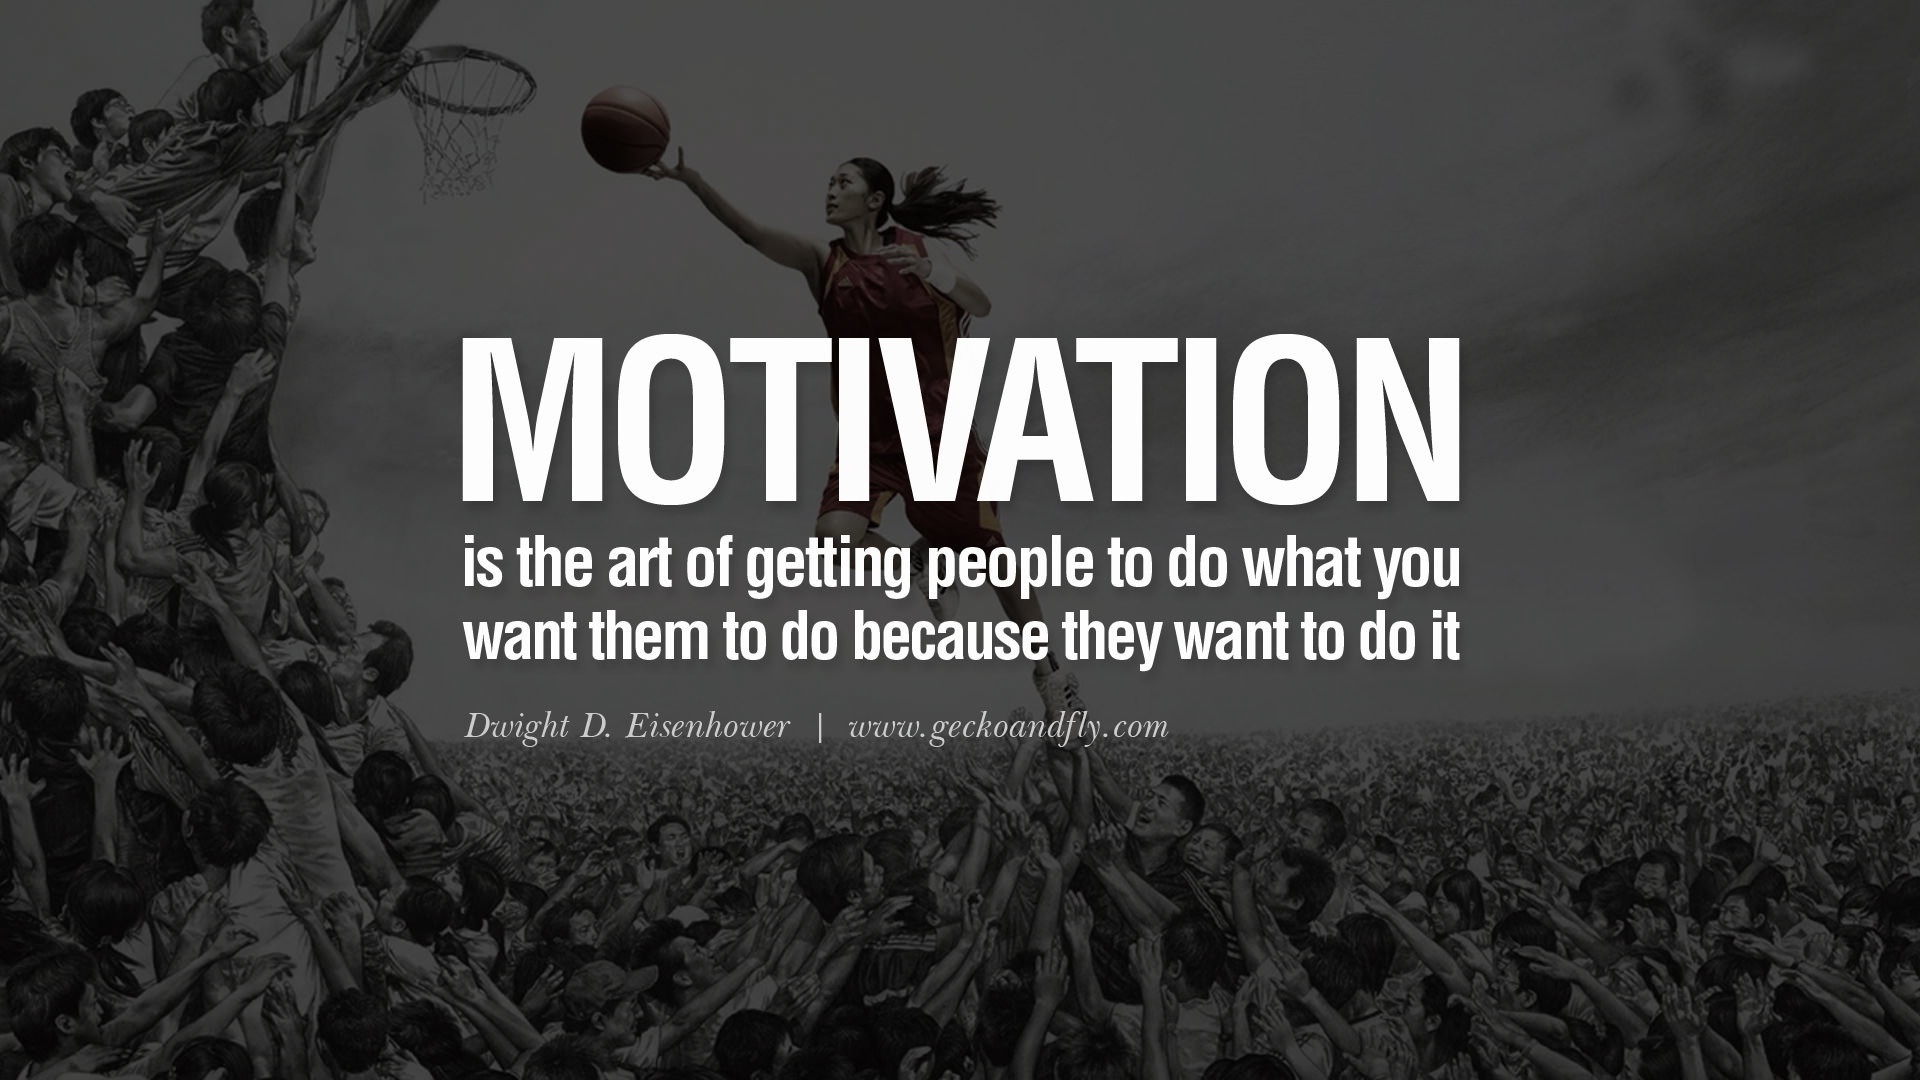 Basketball Motivational Quotes Wallpapers